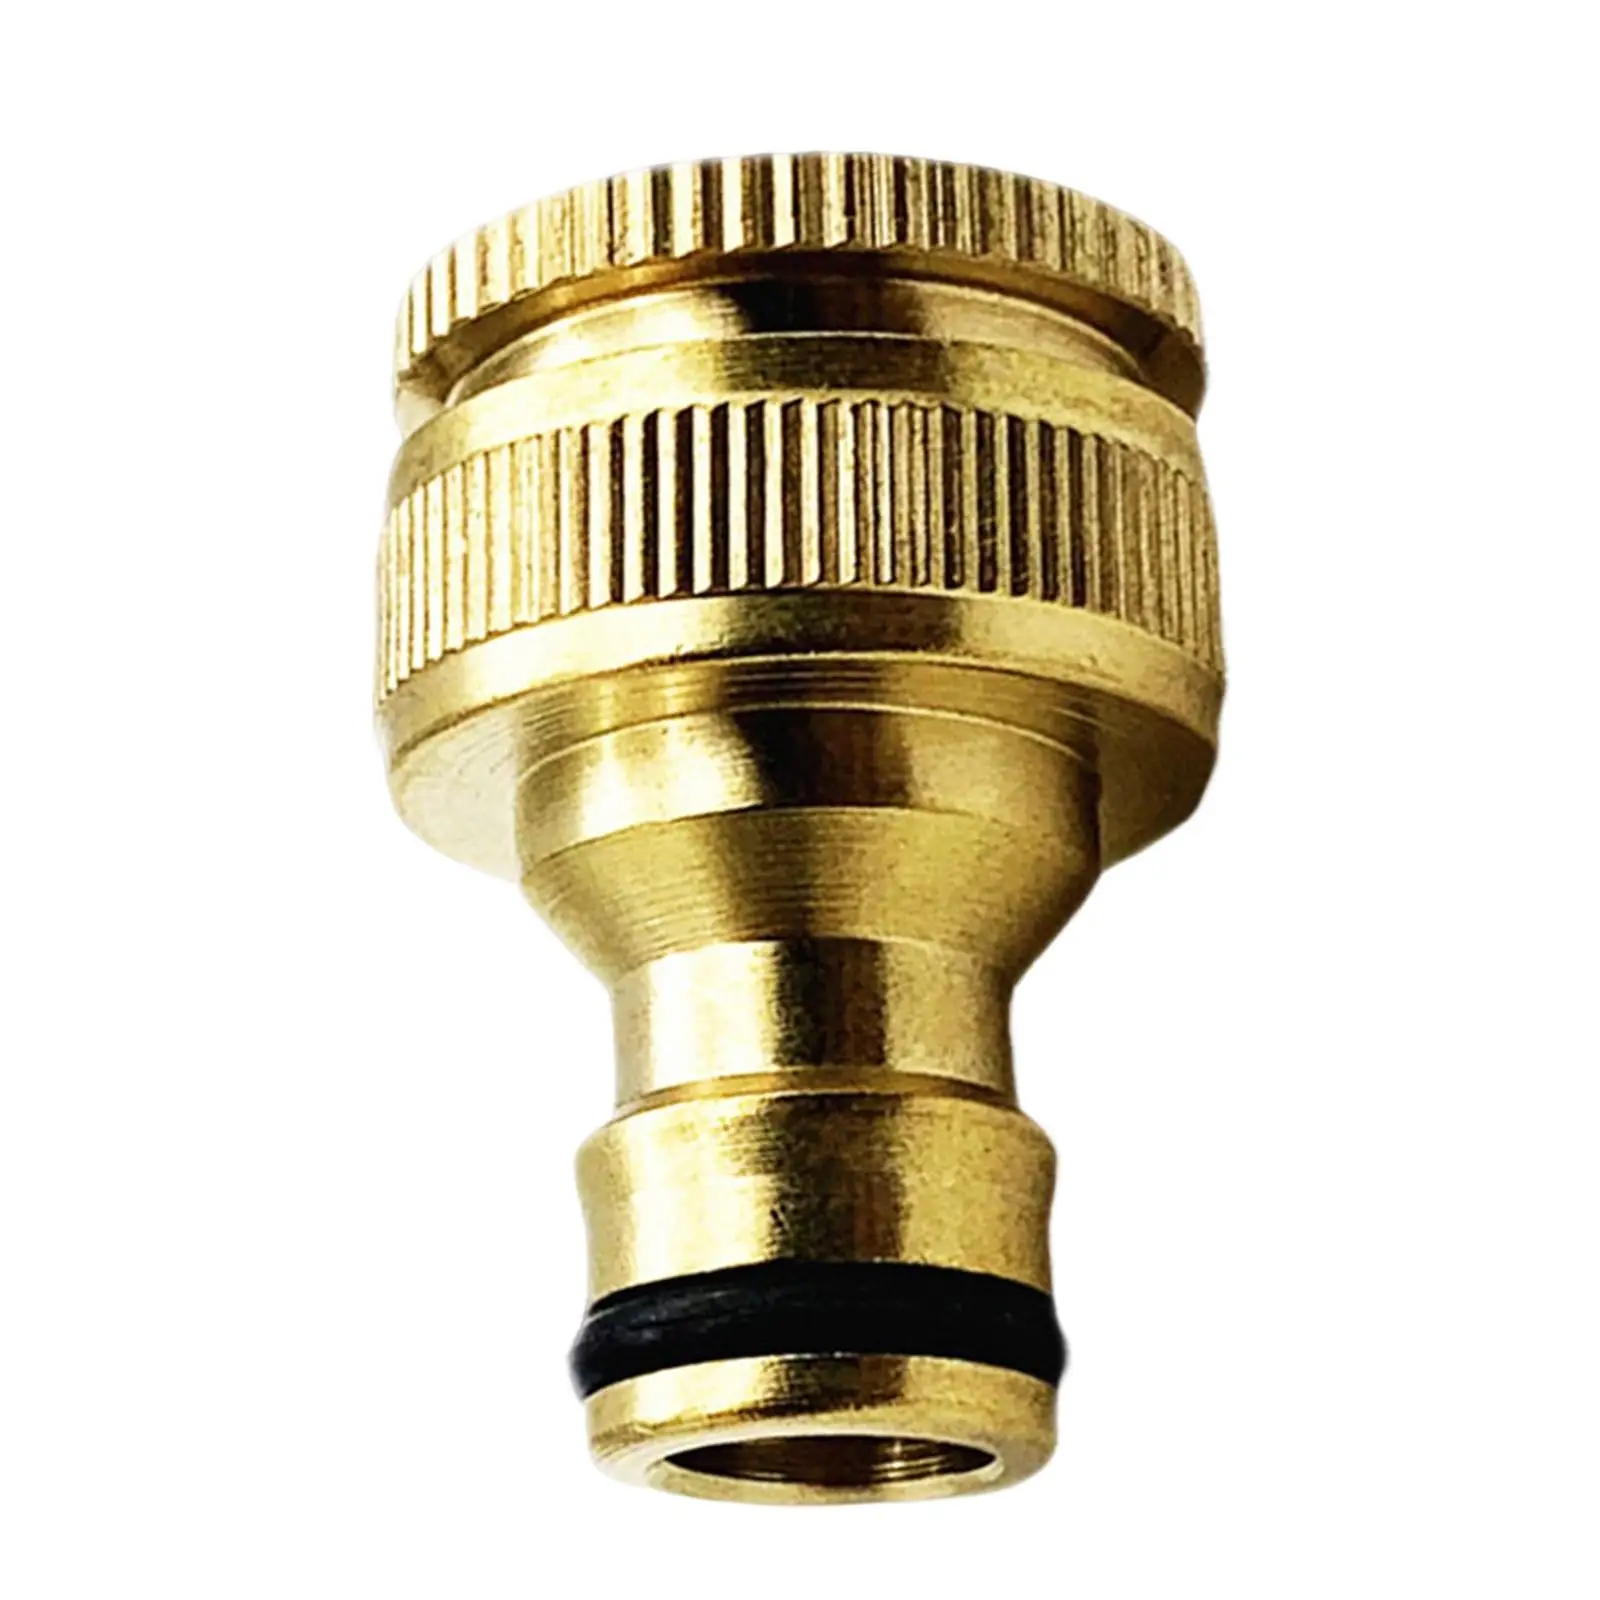 Brass Fitting Conversion Adapter Durable Sturdy for High Pressure Washer